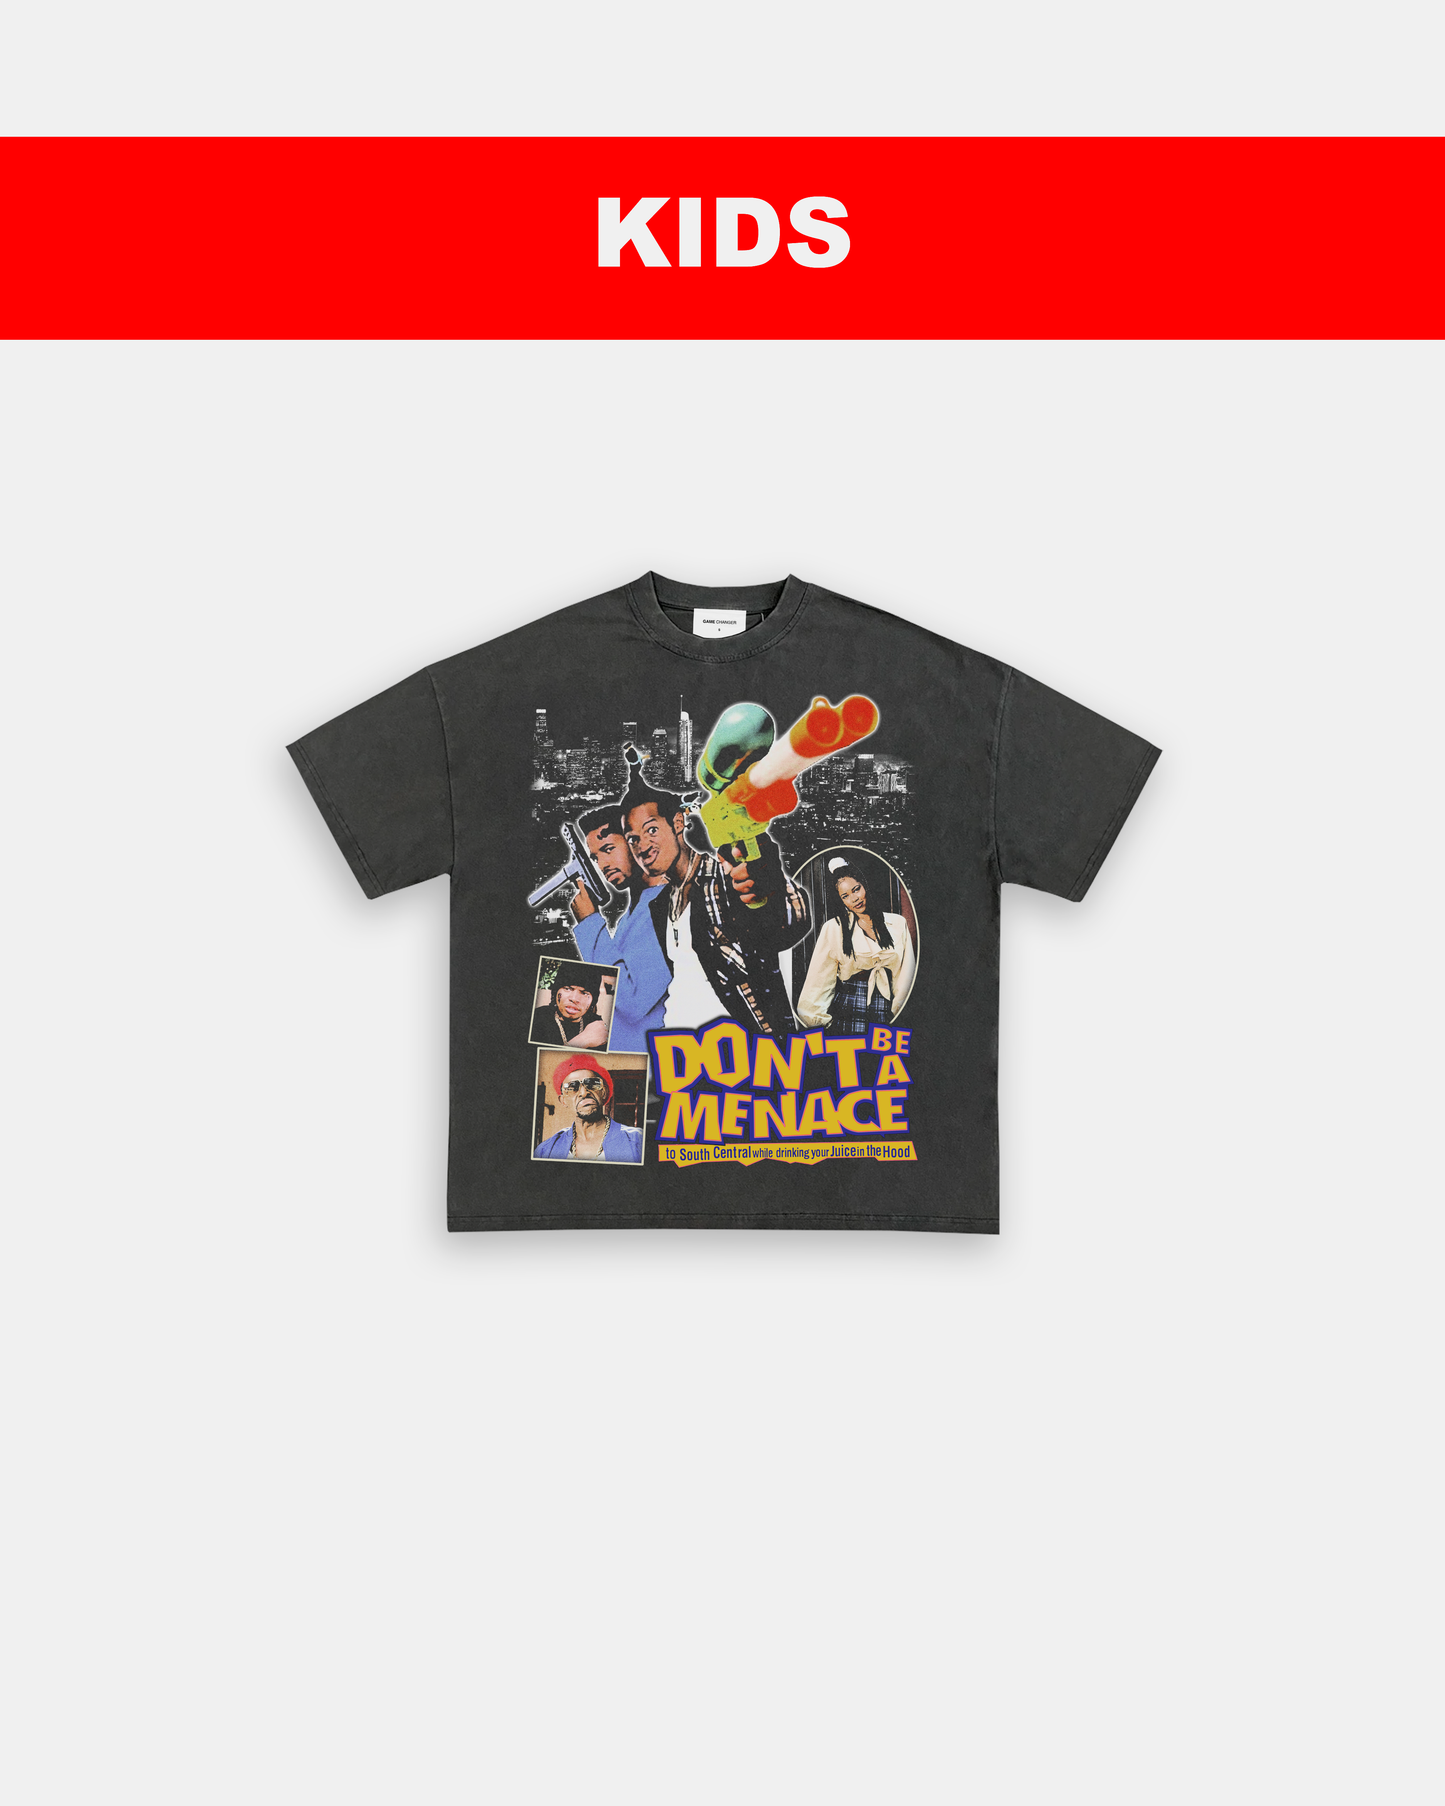 DONT BE A MENACE - KIDS TEE